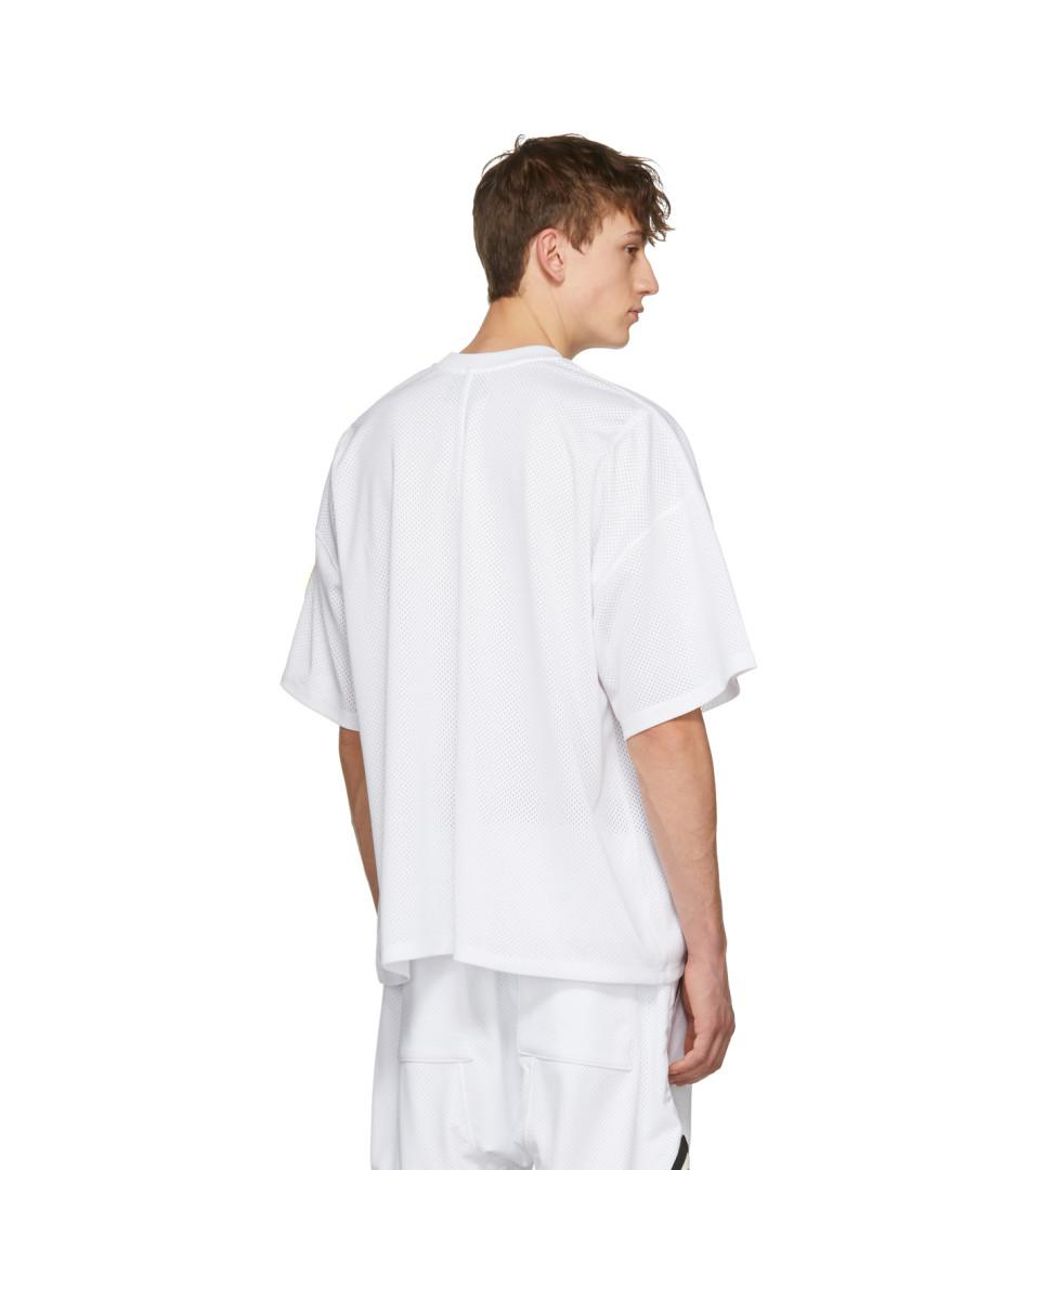 Fear of God SSENSE Exclusive White Mesh Batting Practice Jersey T